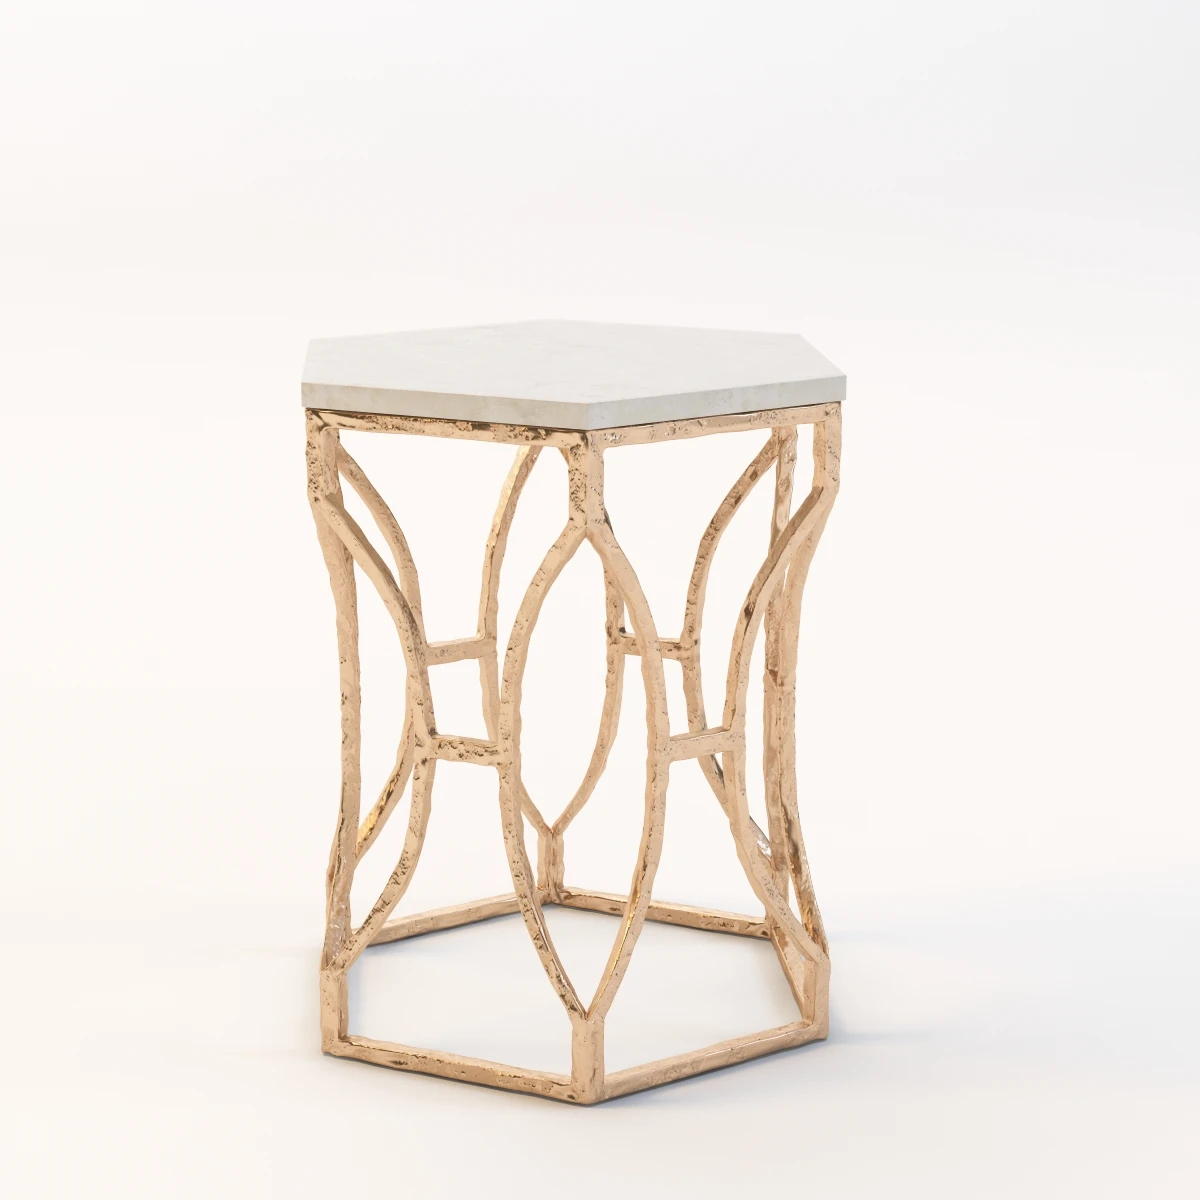 Roja Antique Gold Leaf Cream Marble Hexagonal Side Table 3D Model_01